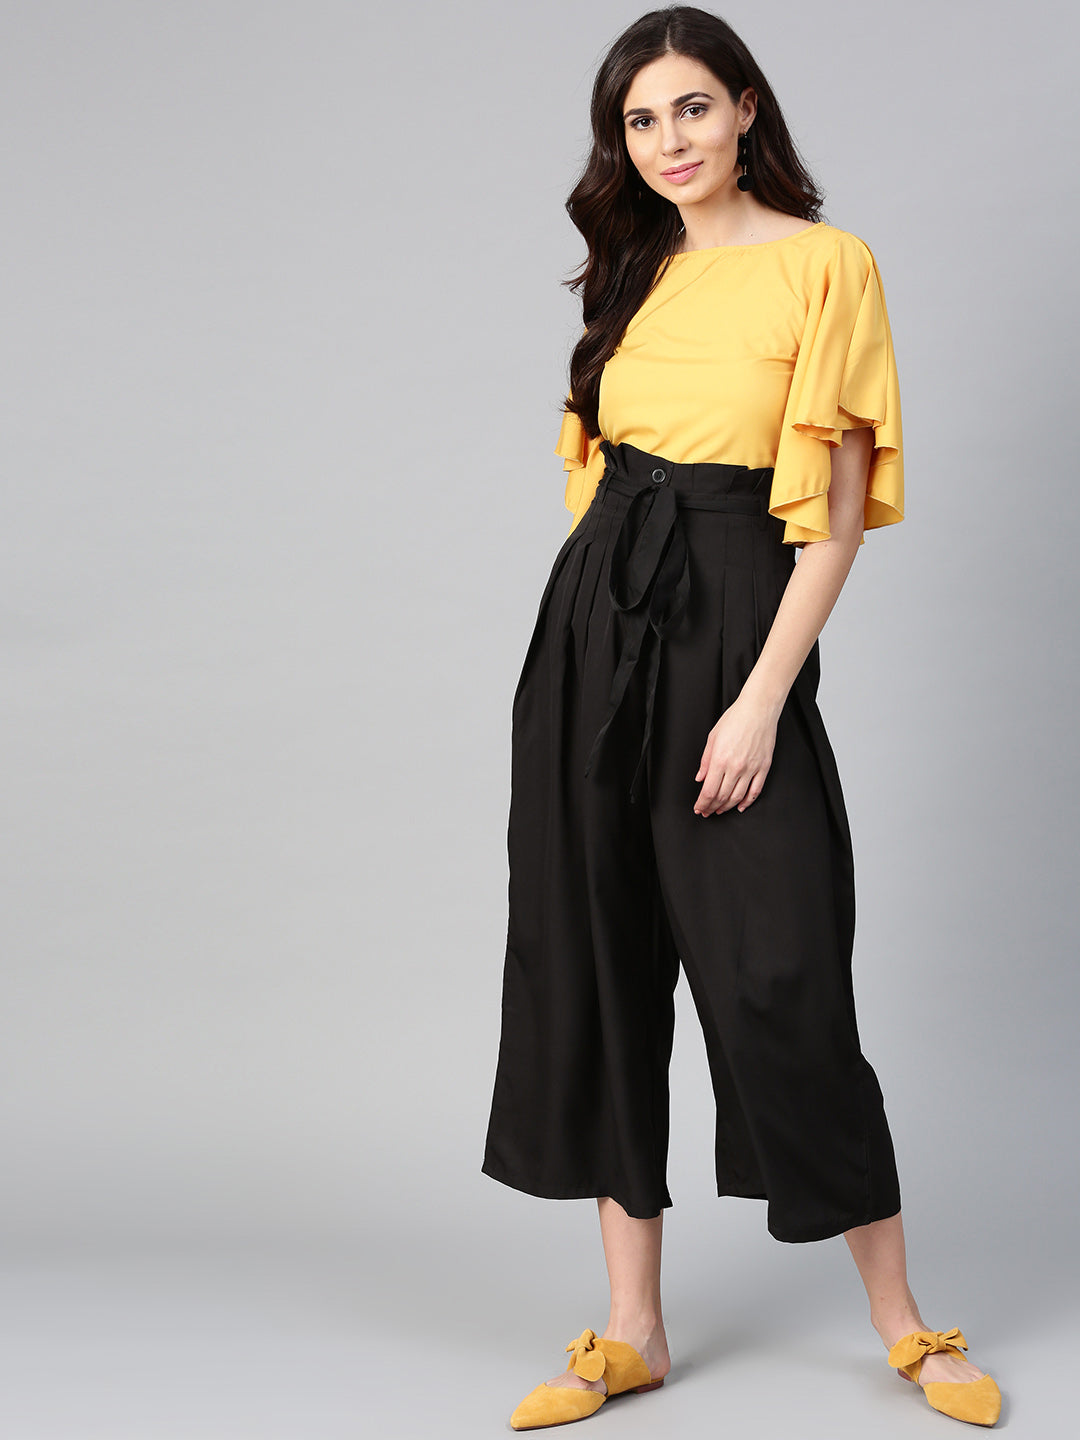 One Shoulder Ruffle Top  High Waist Wide Leg Pants  Chic tops blouses  Dressy outfits One shoulder ruffle top